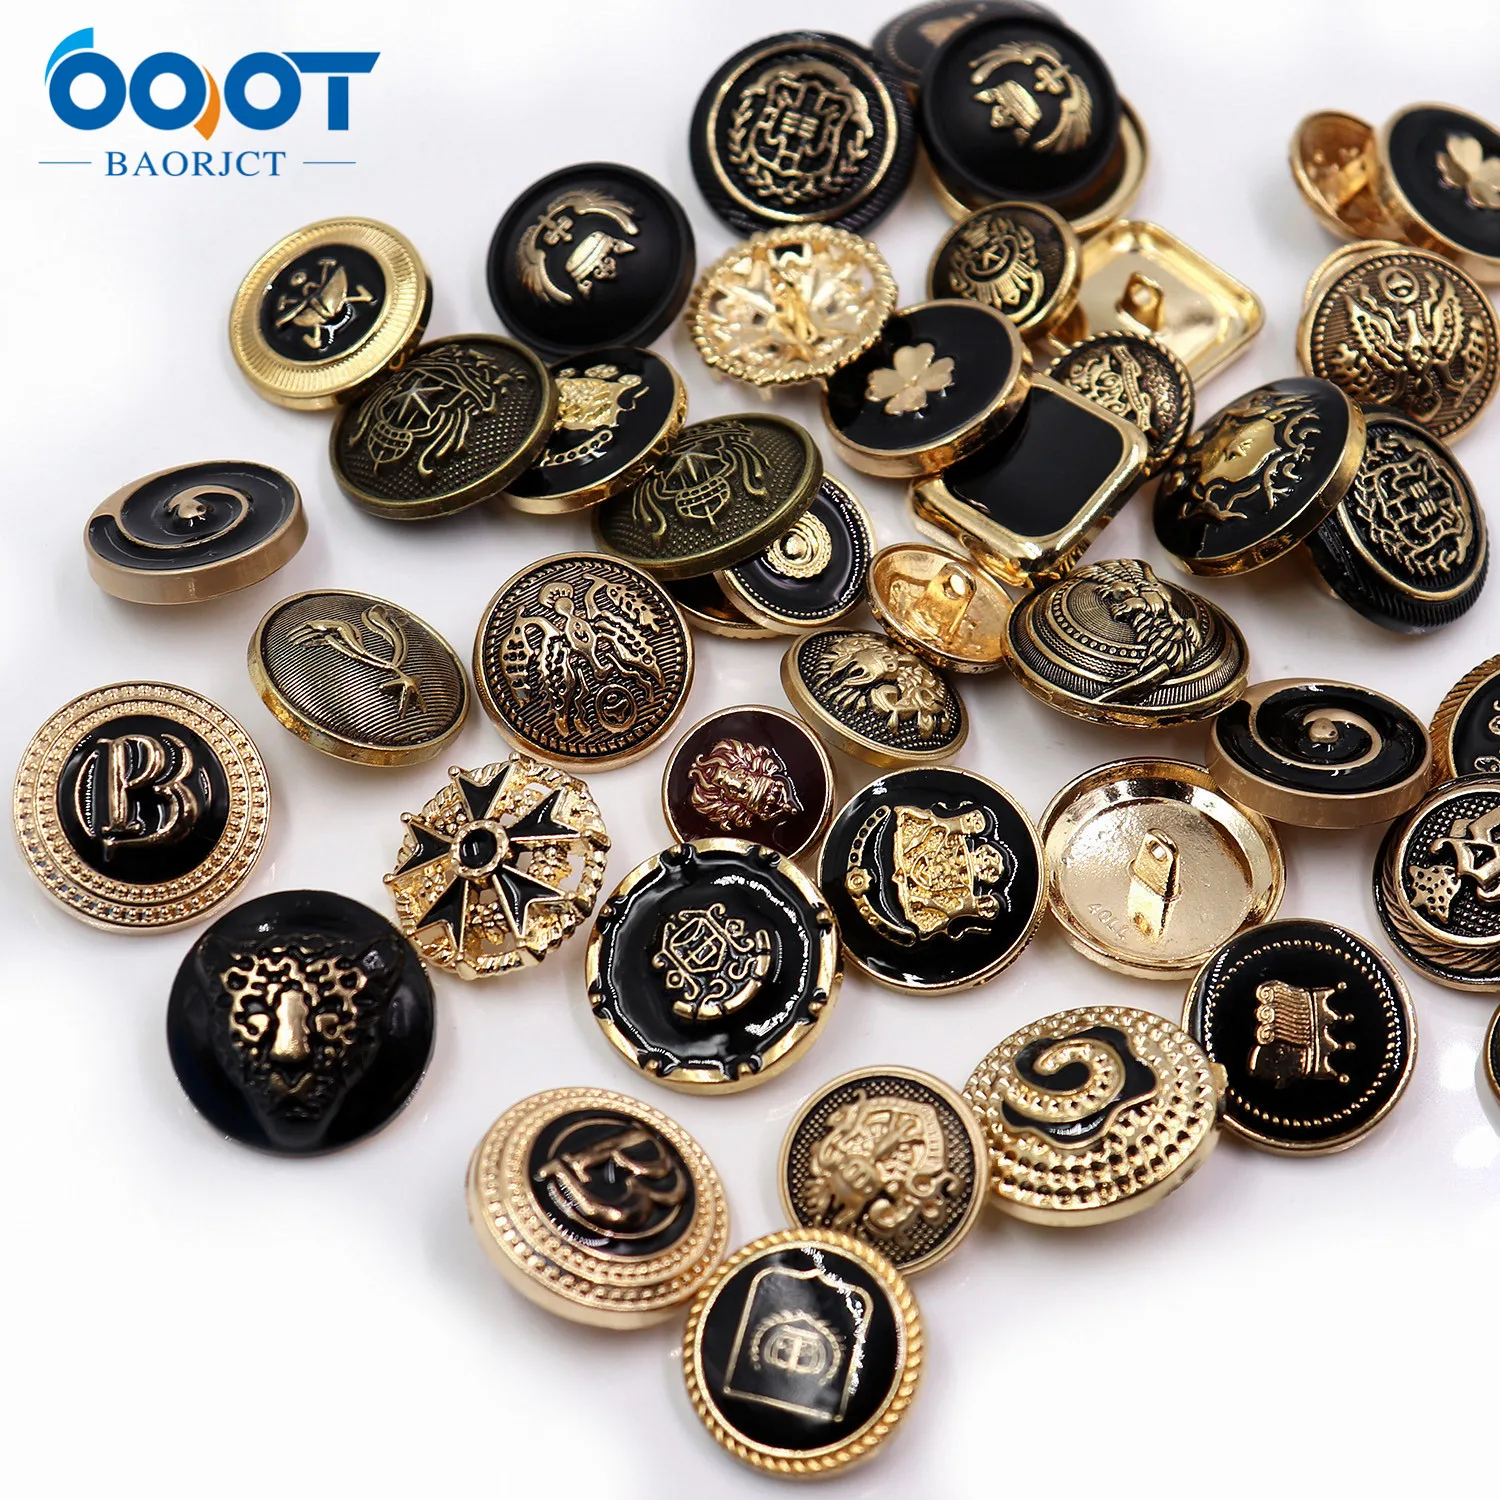 N1711231 , 10pcs Metal buttons, clothing accessories DIY handmade materials  , Suit coat buttons, fashion decorative buttons